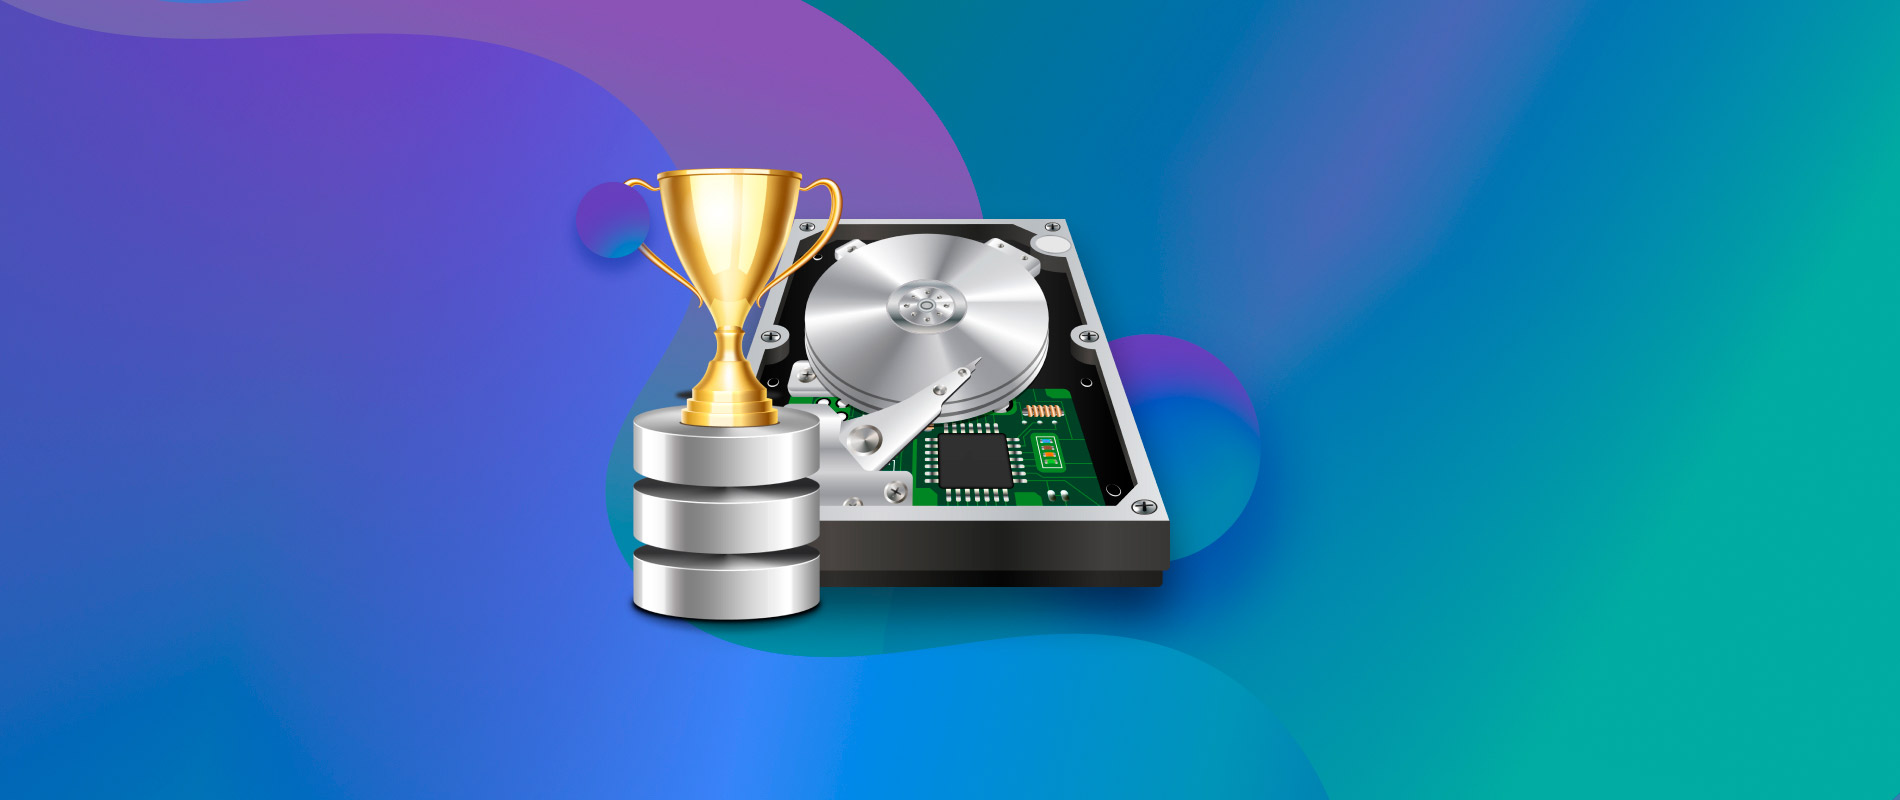 Best Hard Drive Data Recovery Services (That You Can Actually Afford!)